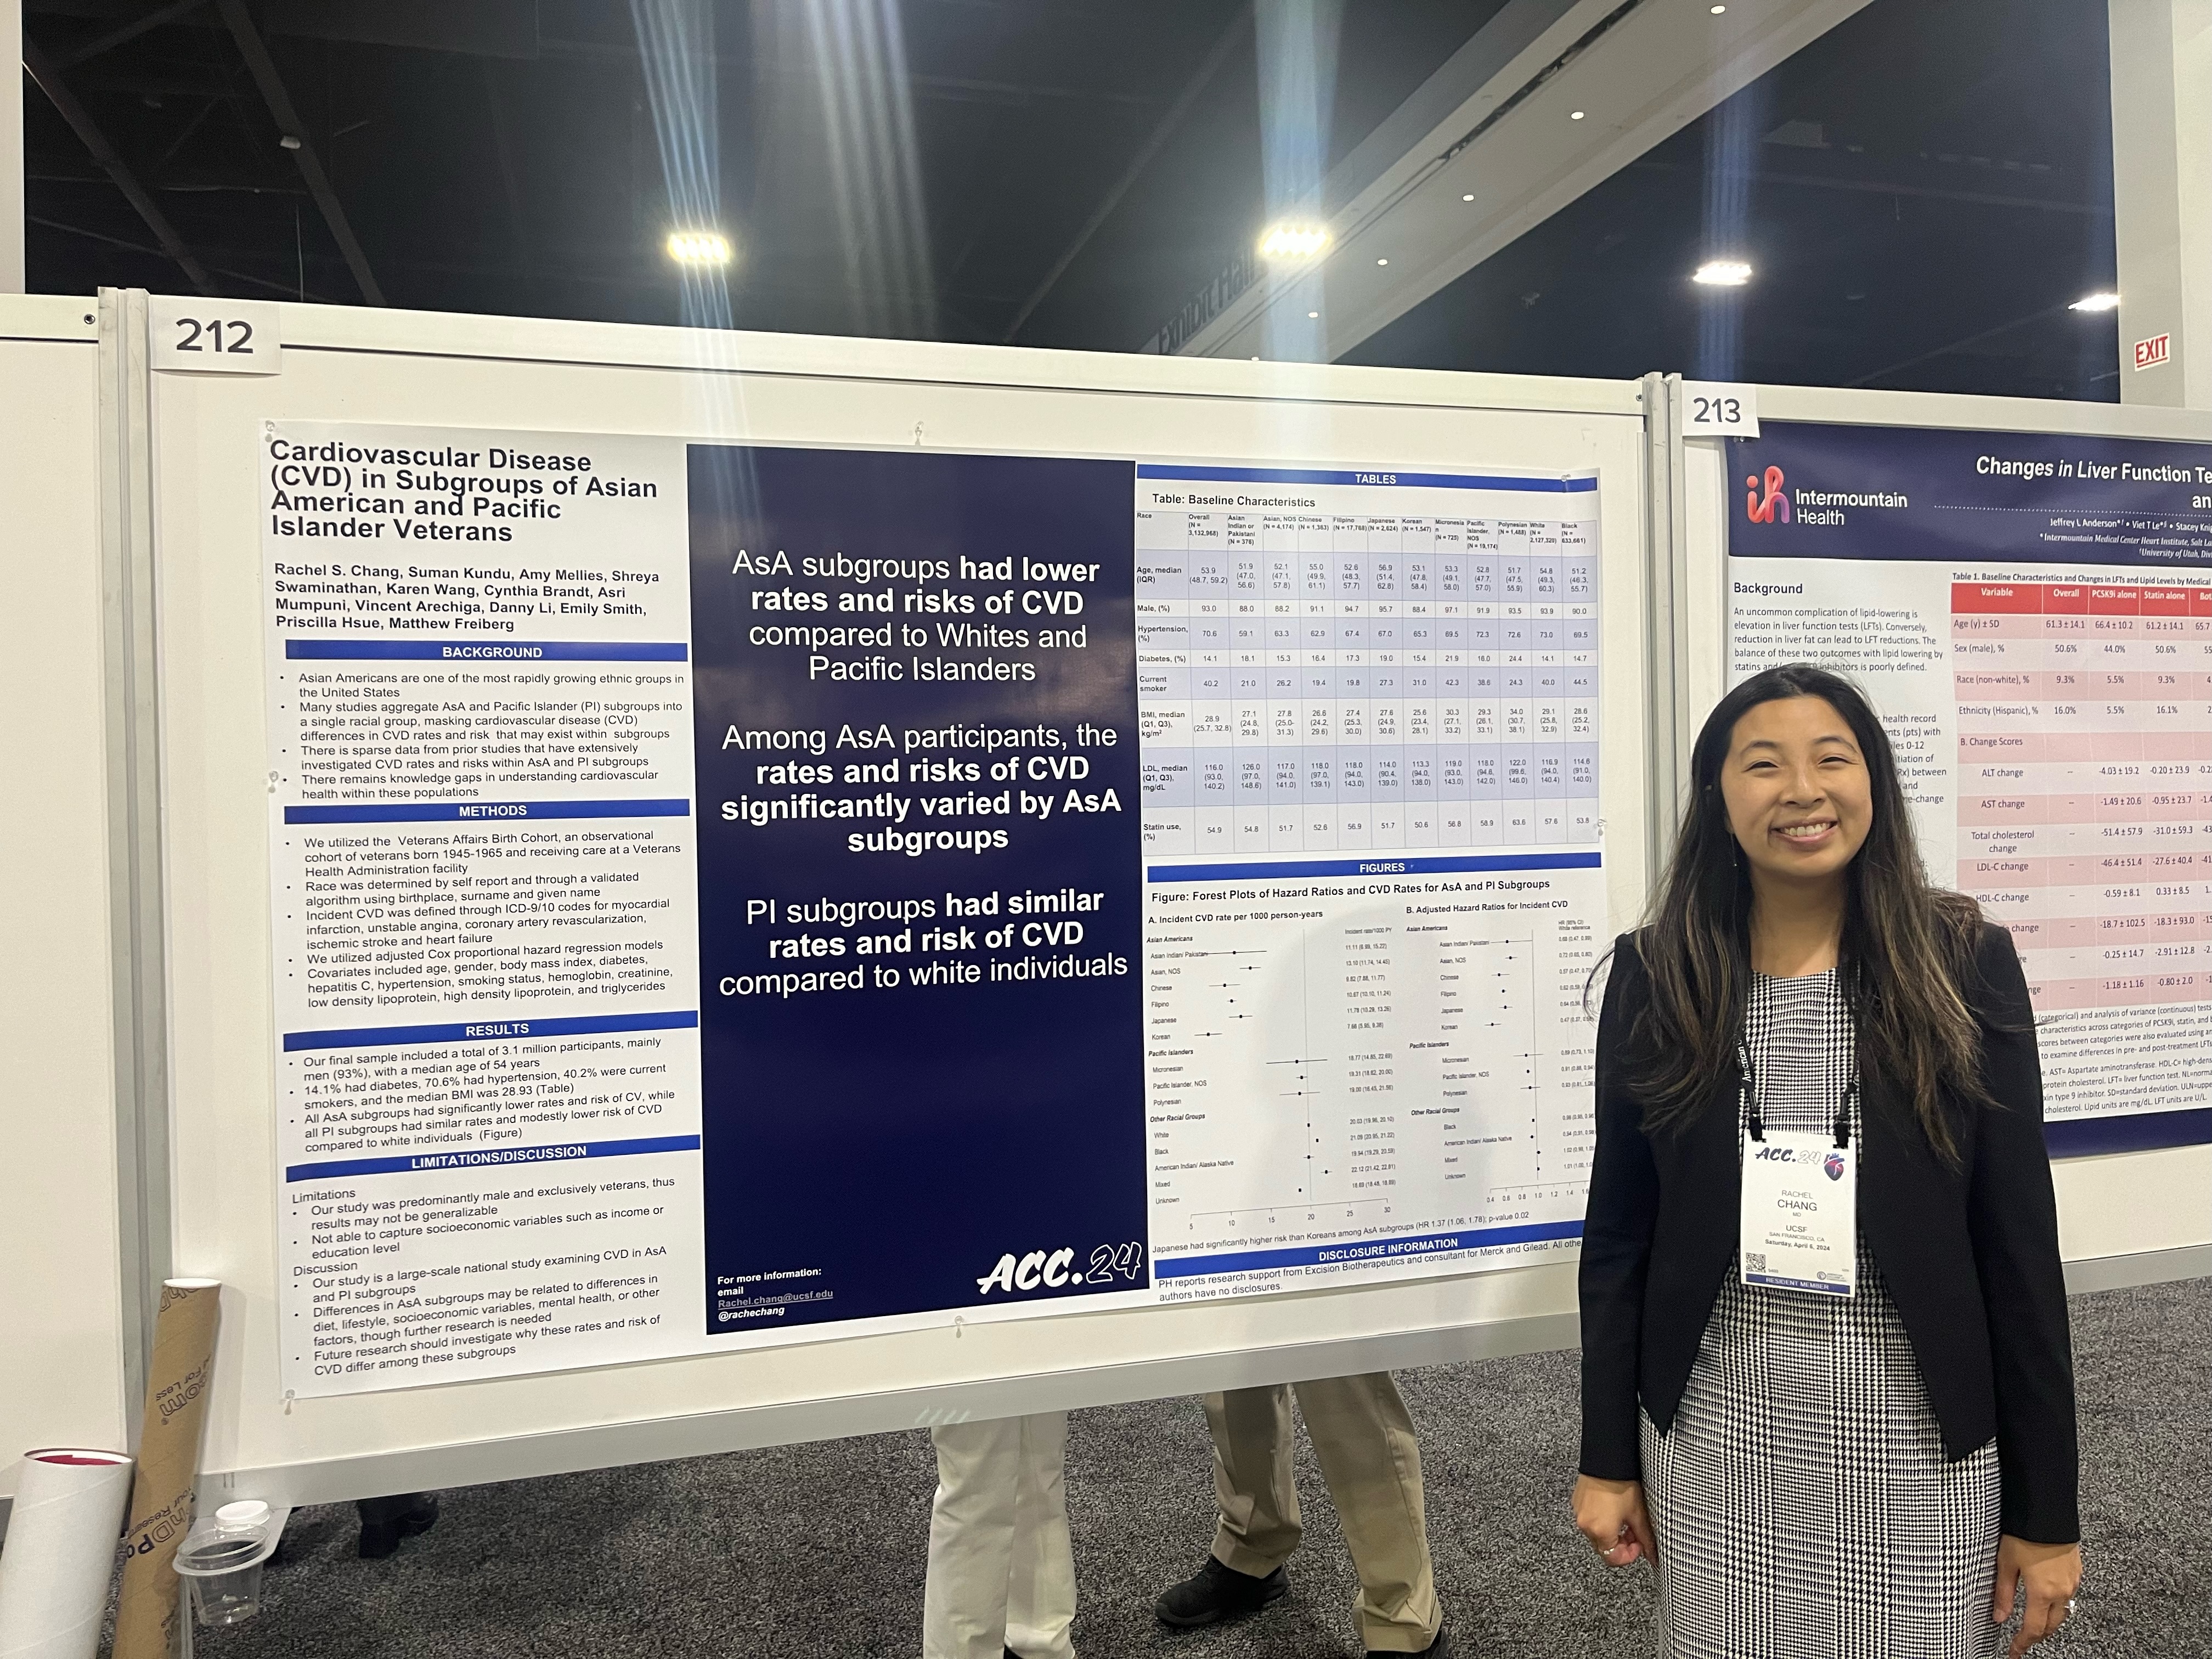 Dr. Chang with poster